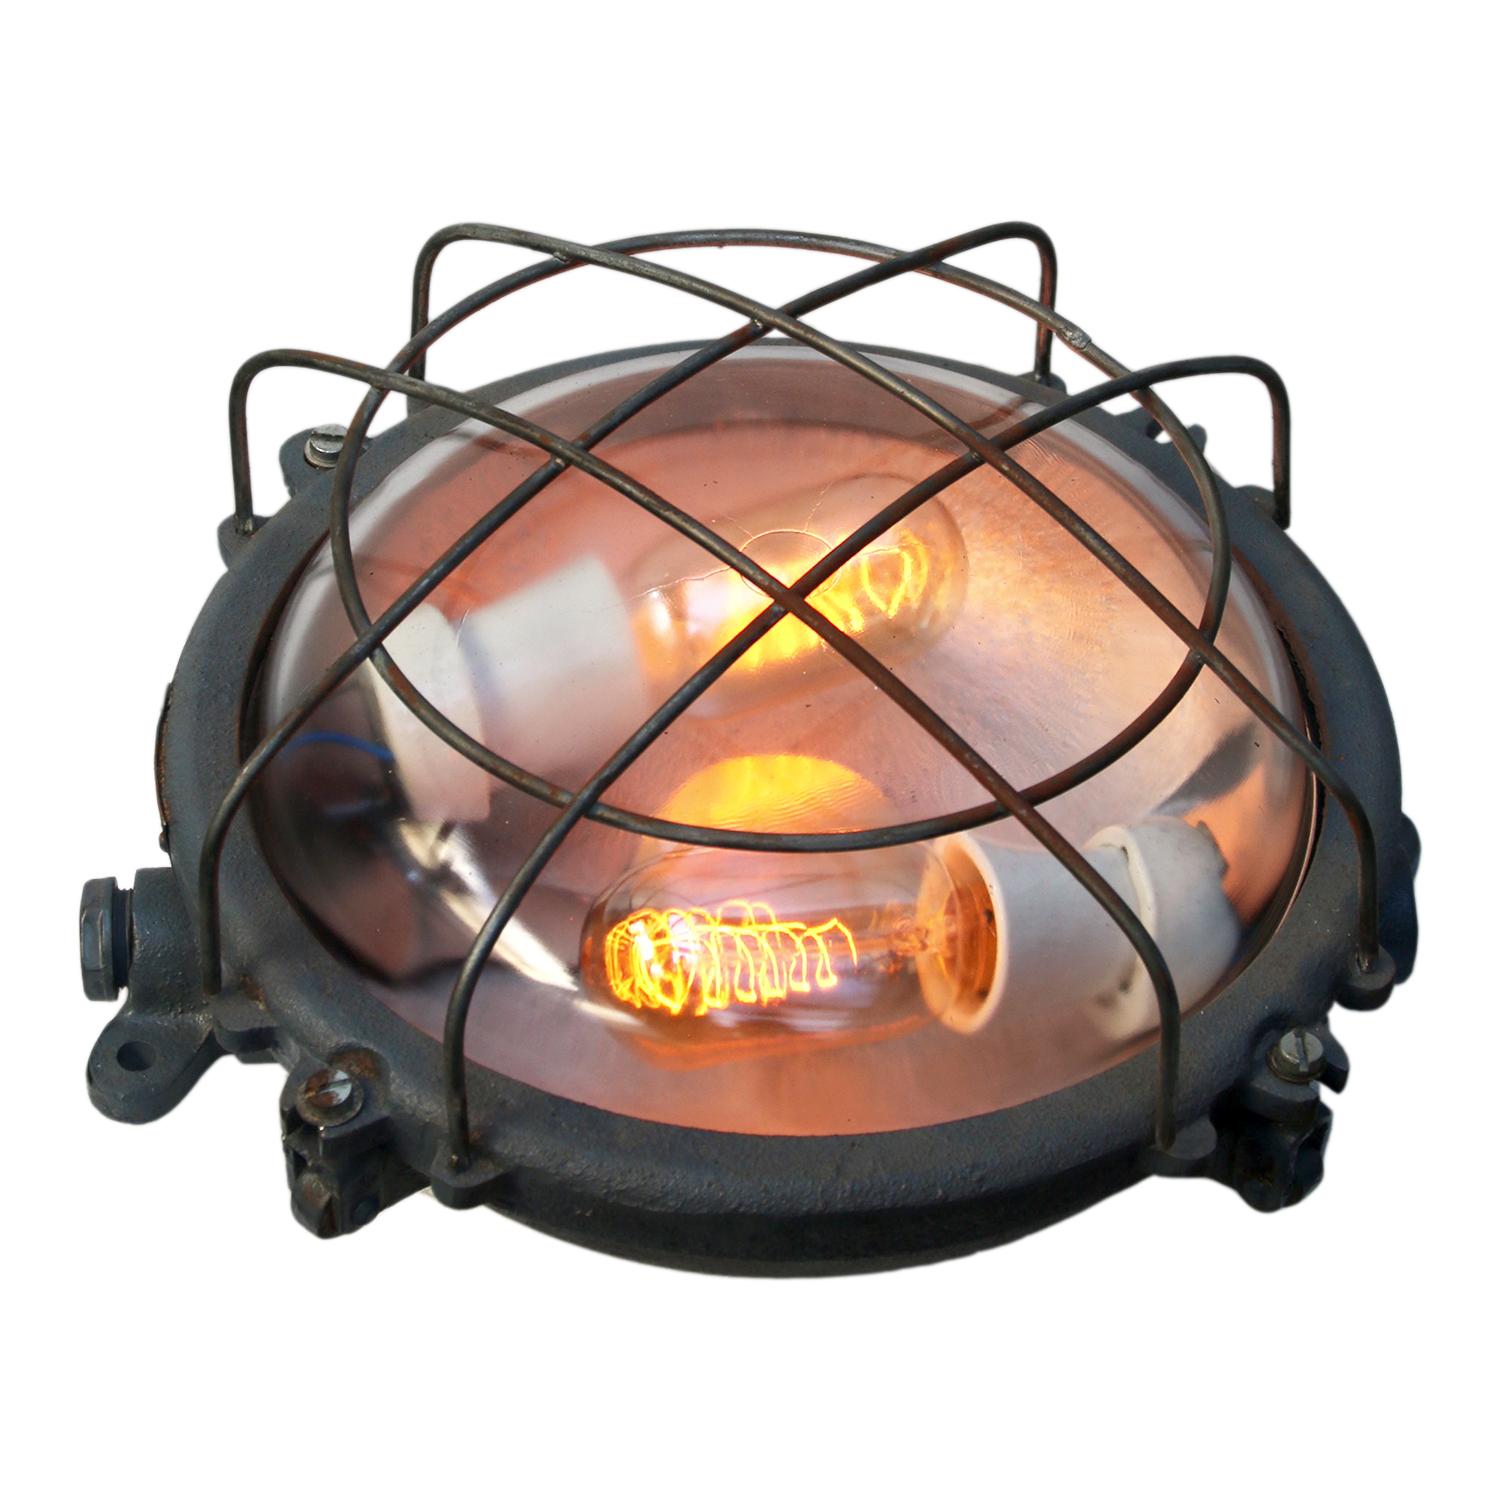 Industrial wall and ceiling scone. Grey cast iron.
Clear glass. Double bulb holder.

Weight: 4.5 kg / 9.9 lb

Priced individual item. All lamps have been made suitable by international standards for incandescent light bulbs, energy-efficient